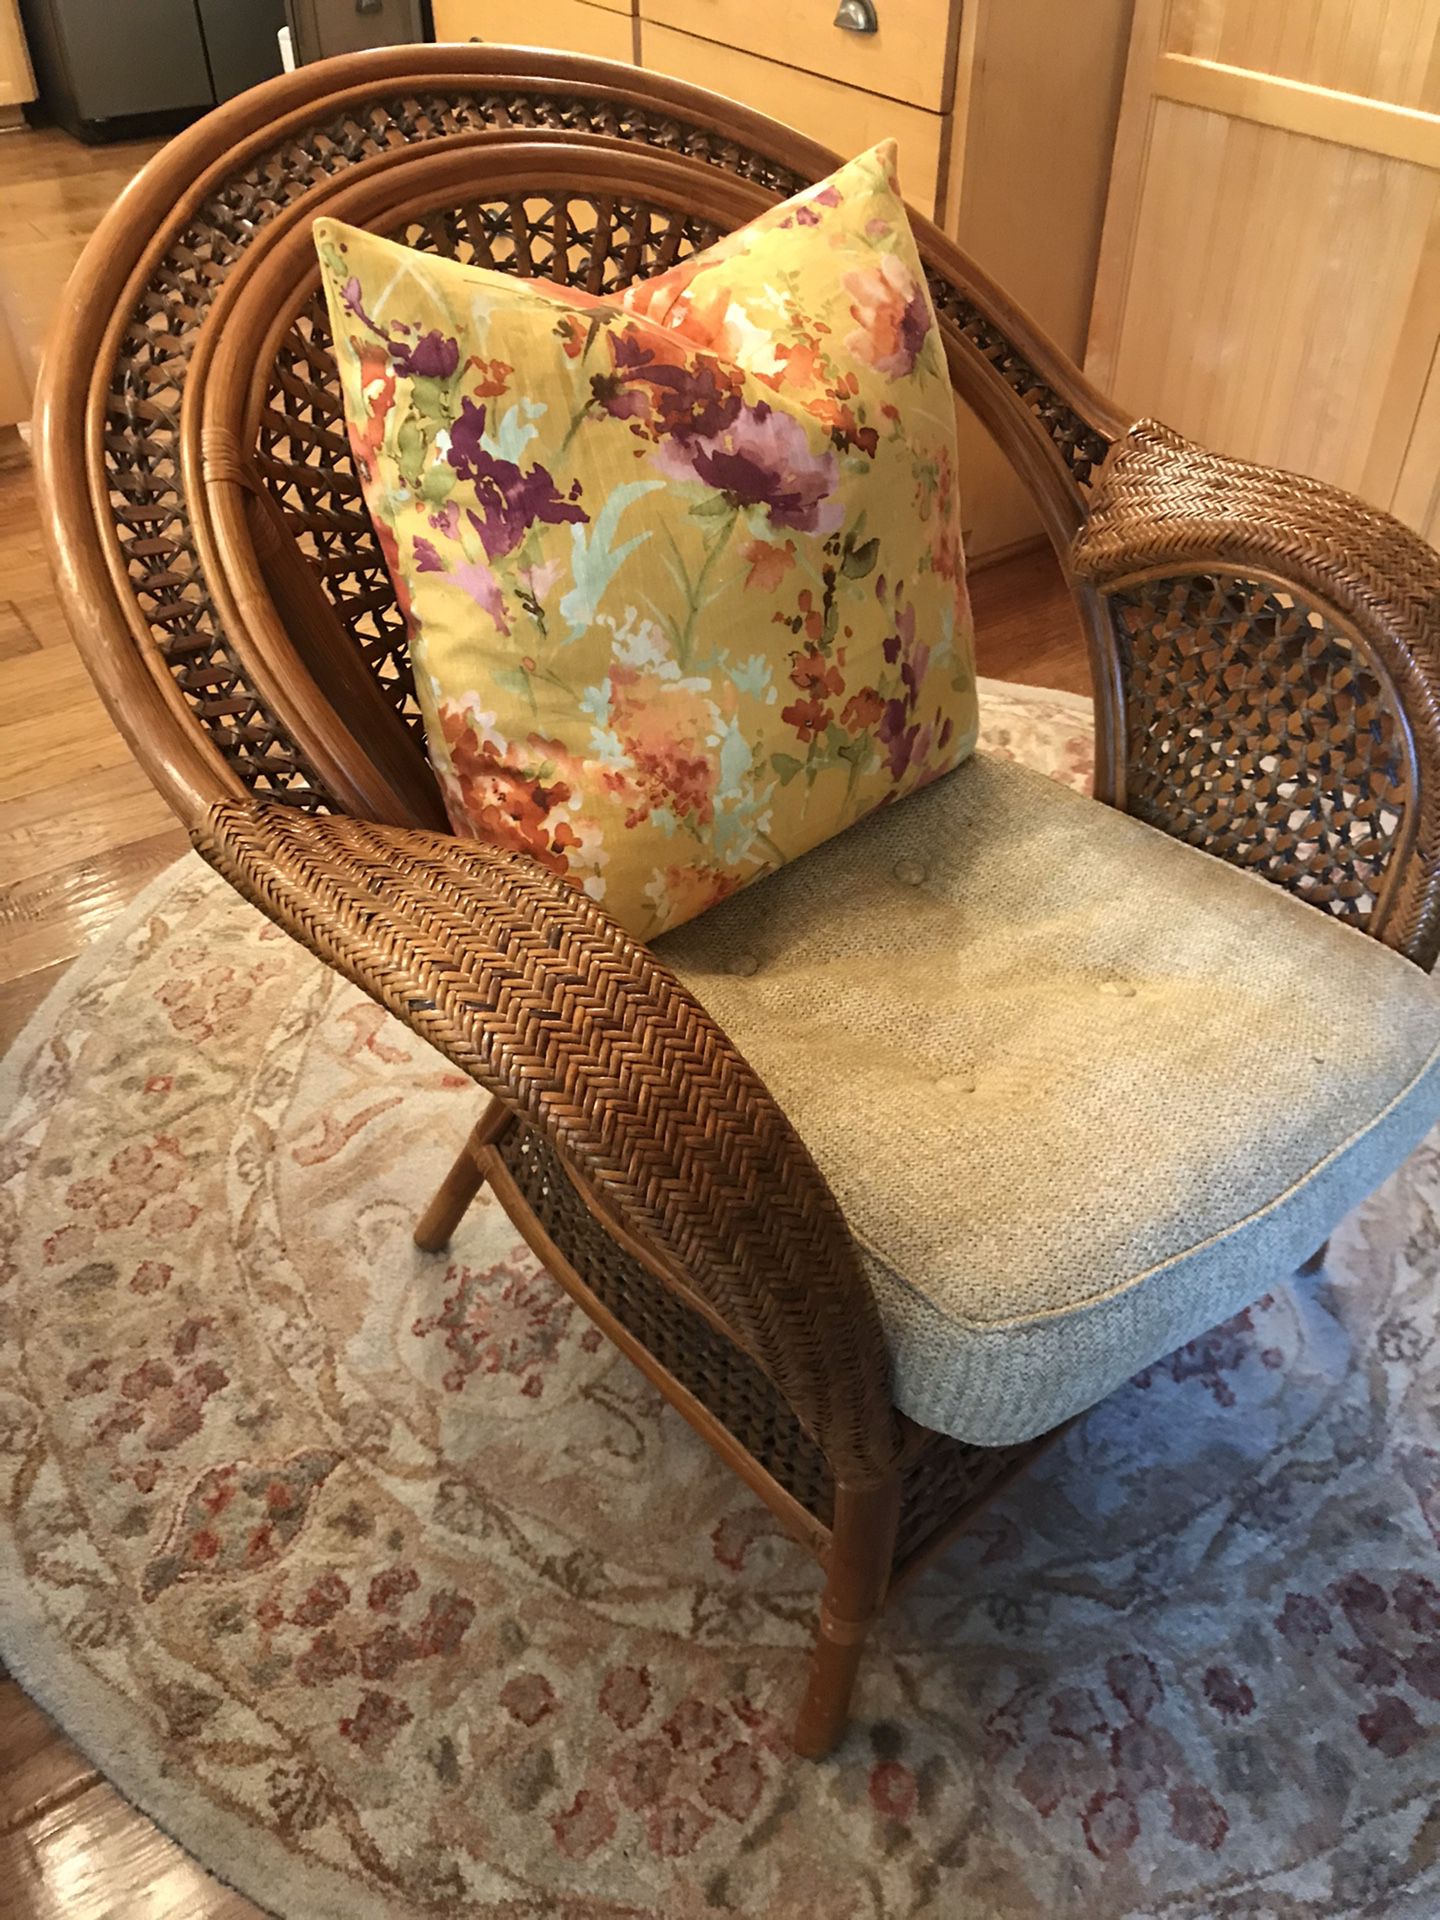 Wicker Pier One chair with cushion